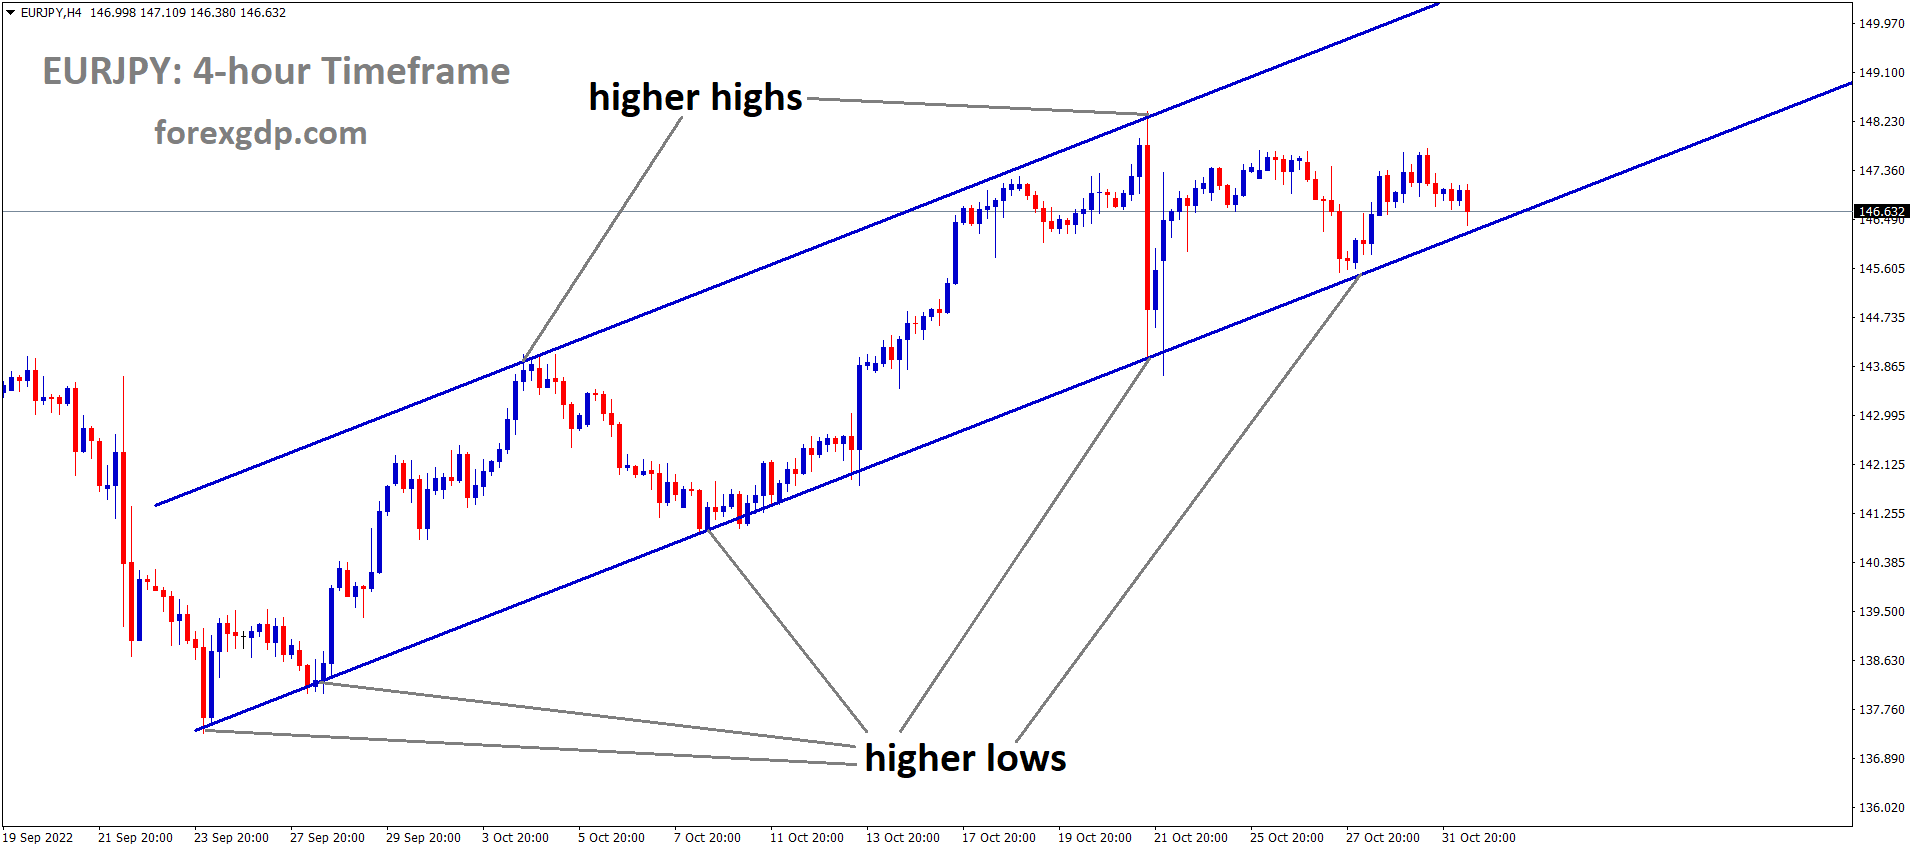 EURJPY is moving in an Ascending channel and the market has reached the higher low area of the channel